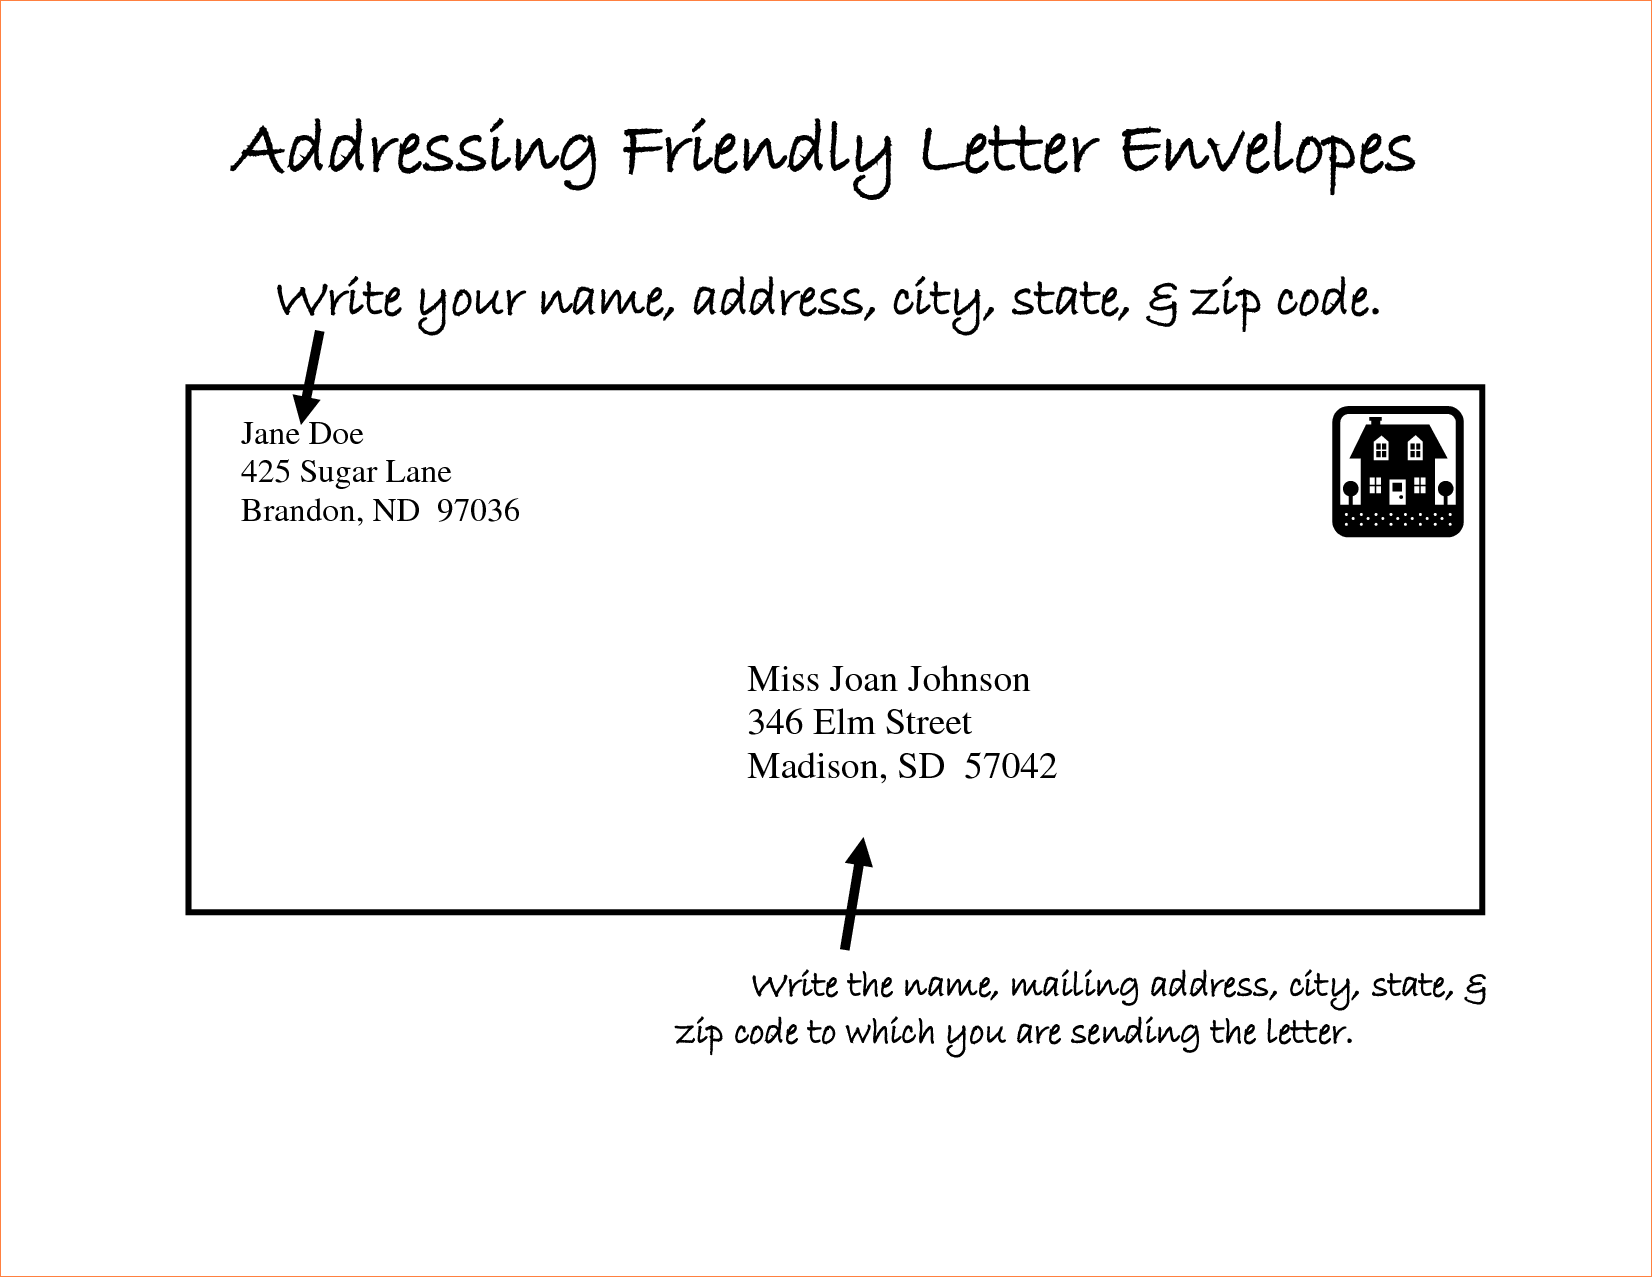 Letter adress addressing a publish photo how address business 64 